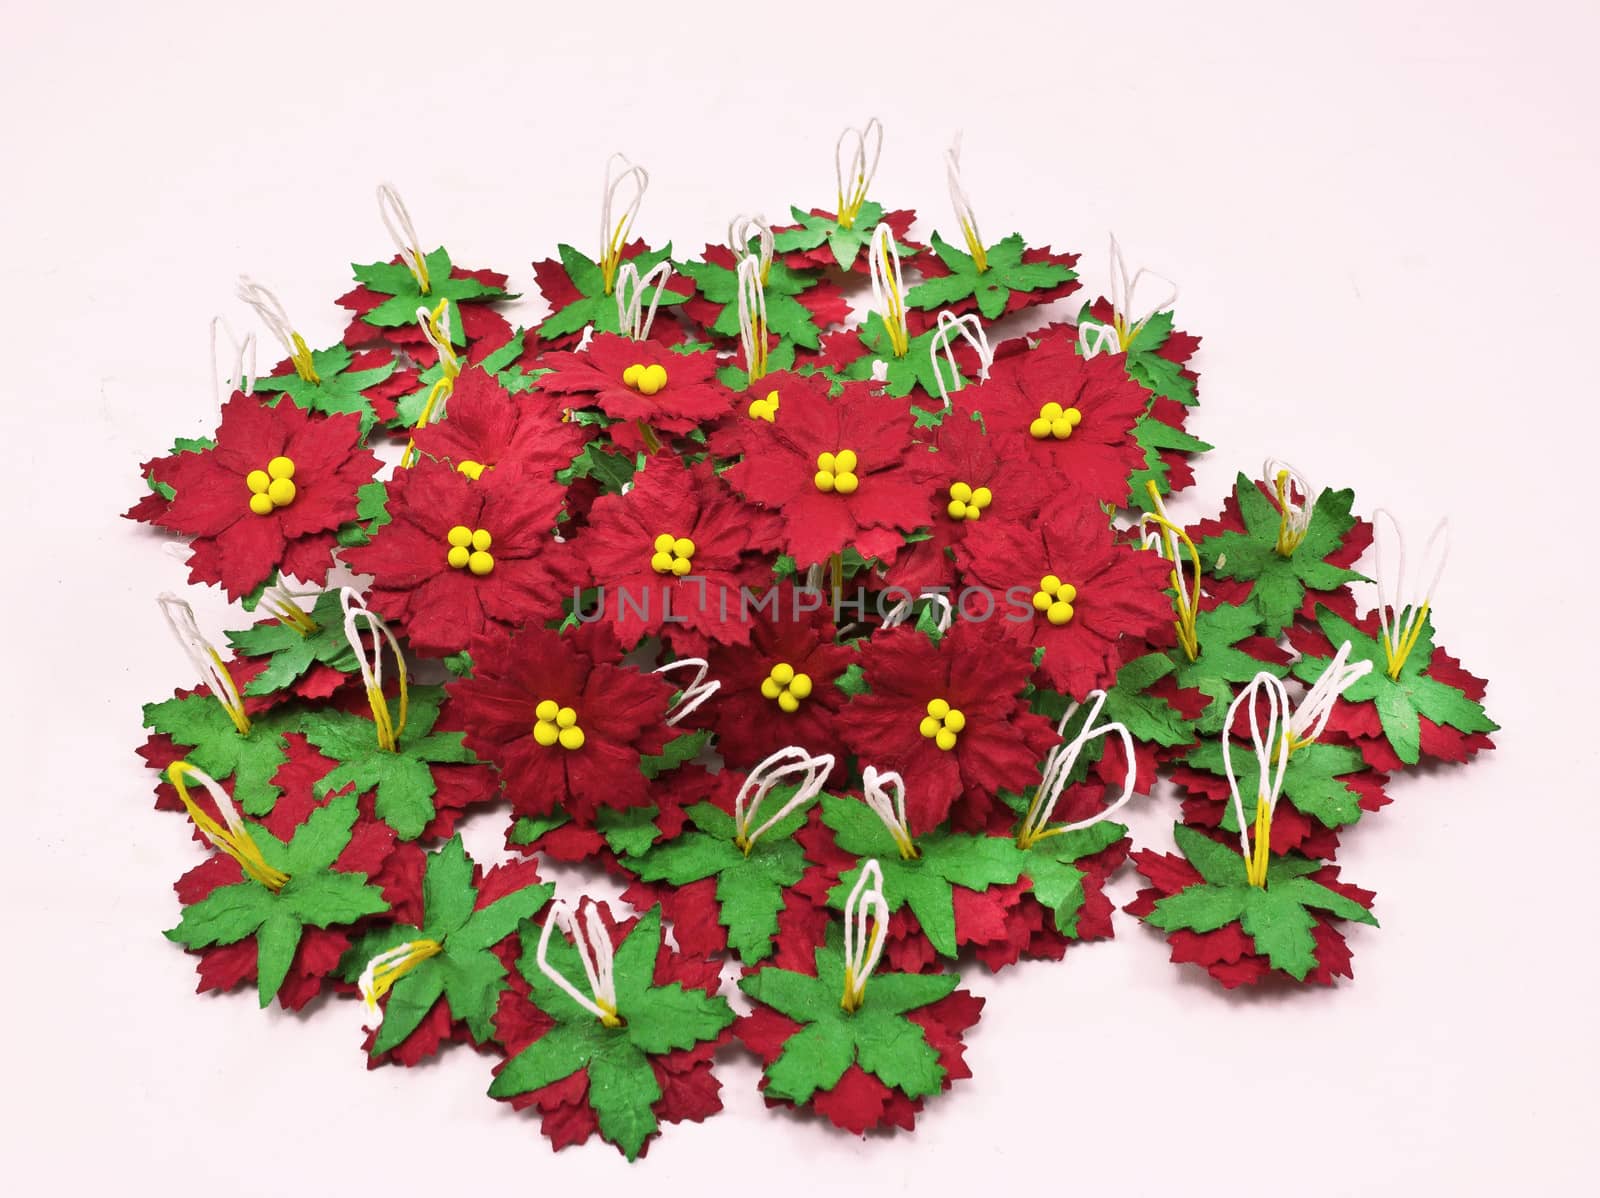 Christmas flower  paper  white isolated. Paper made flowers by sutipp11